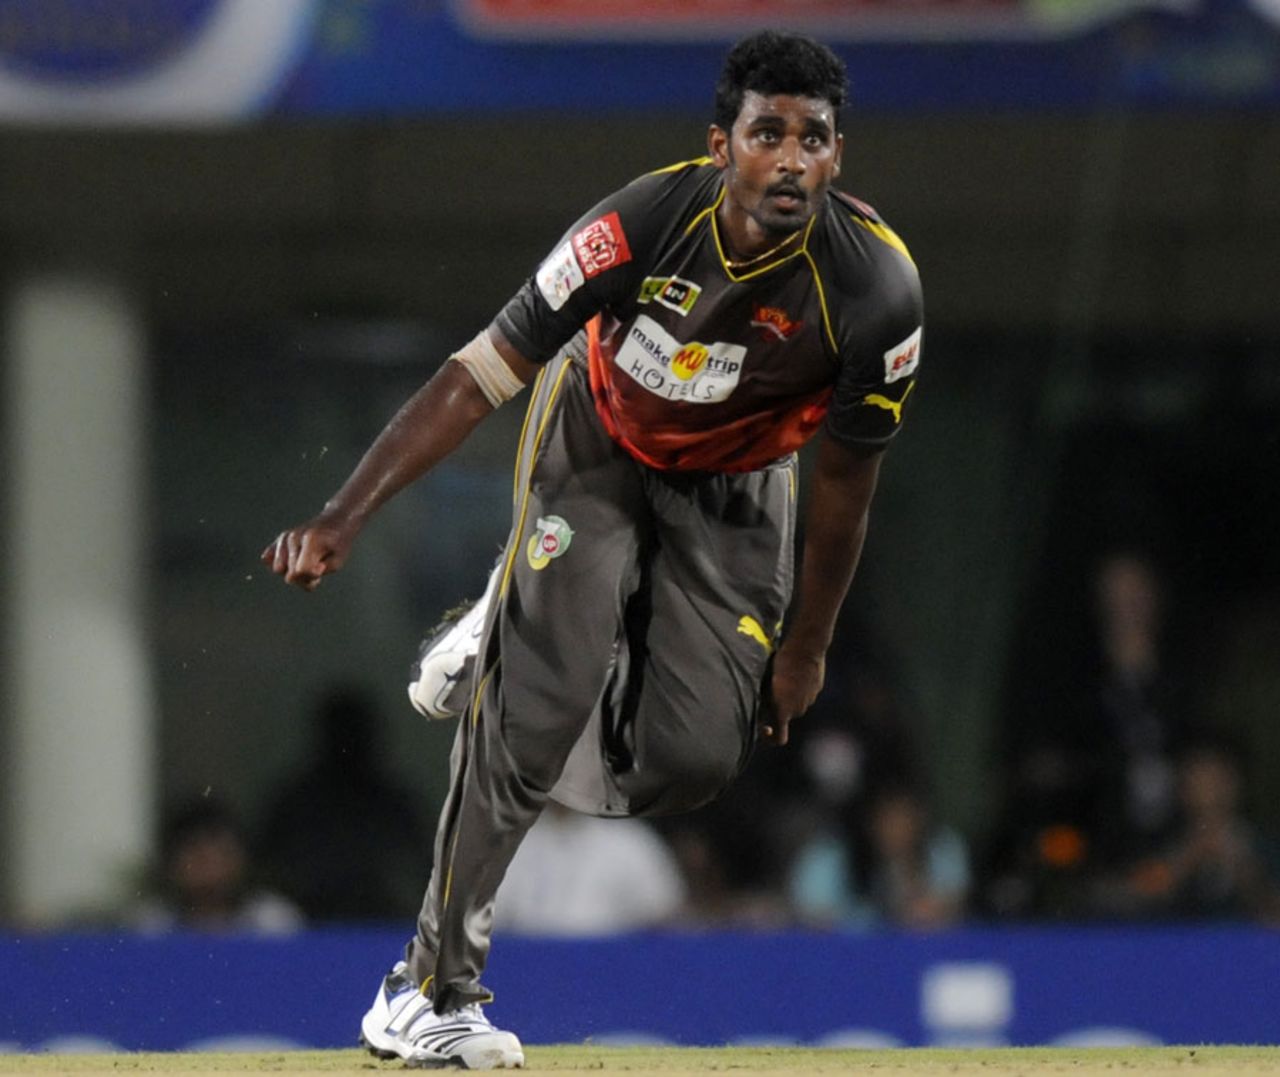 Thisara Perera went wicketless in the innings, Titans v Sunrisers Hyderabad, Champions League 2013, Group B, Ranchi, September 28, 2013